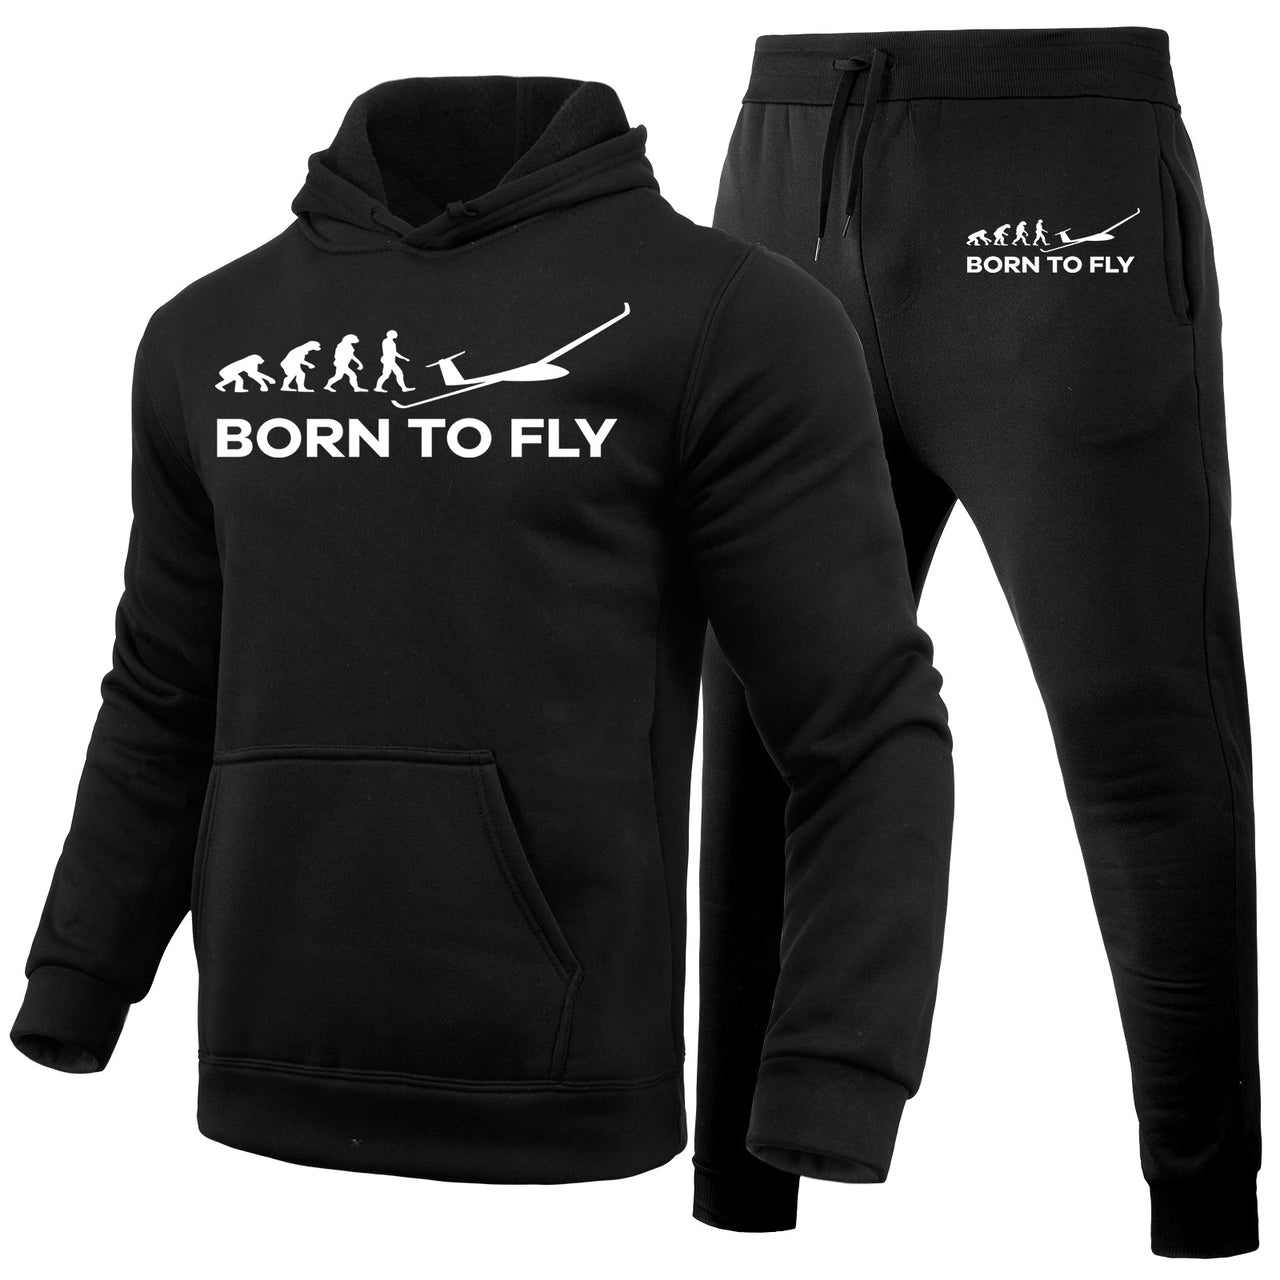 Born To Fly Glider Designed Hoodies & Sweatpants Set